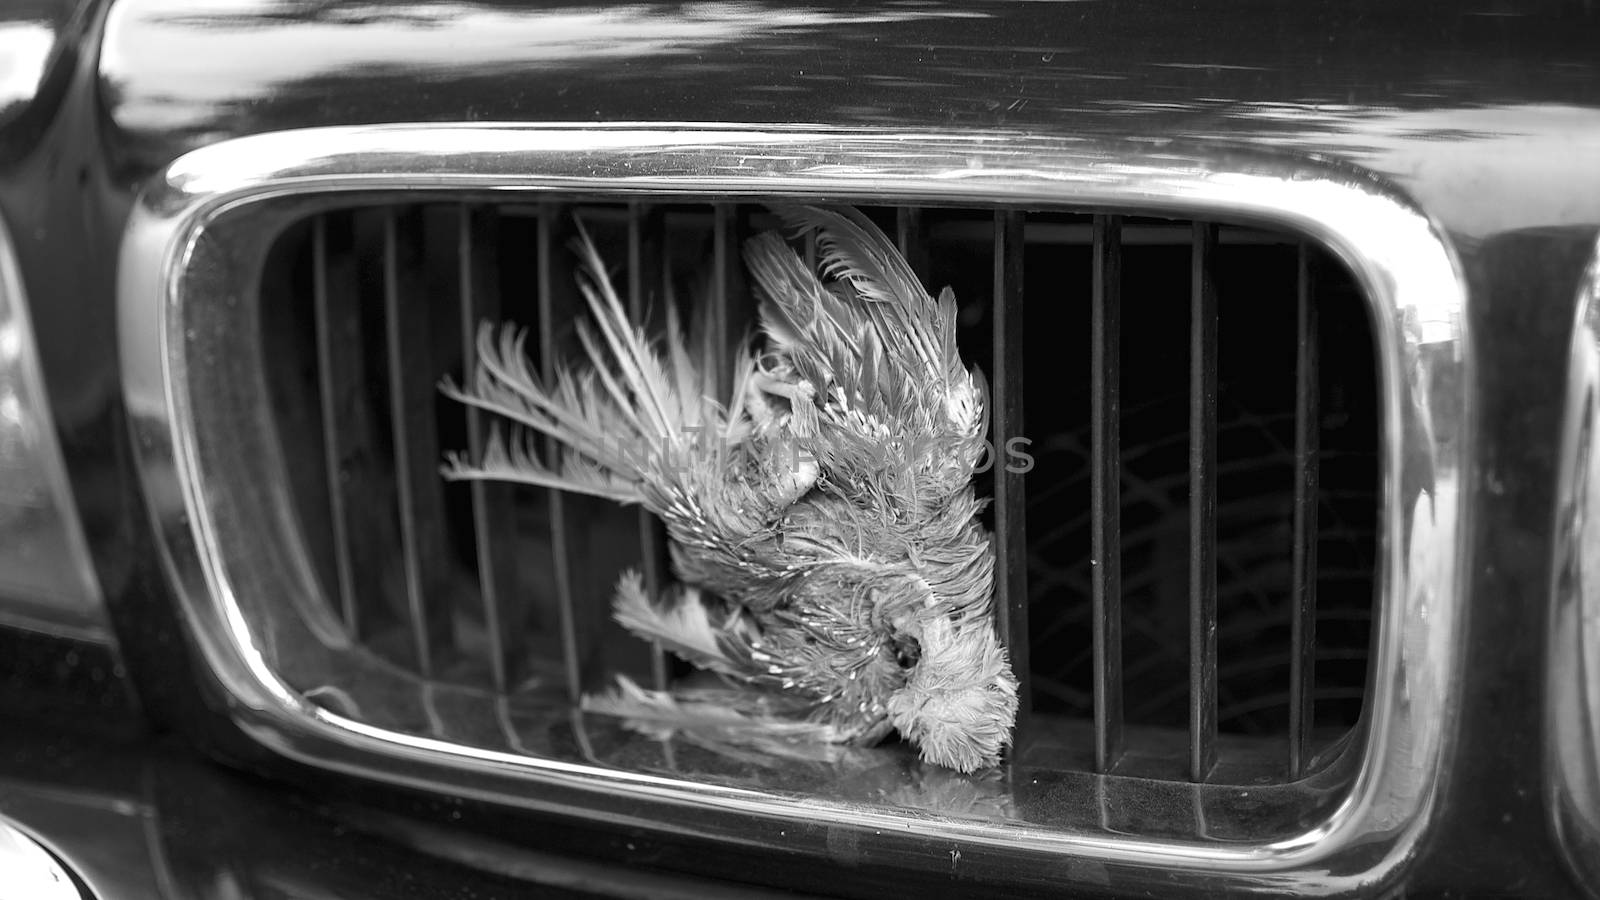 The little bird ended his days on the grill of a car 
 